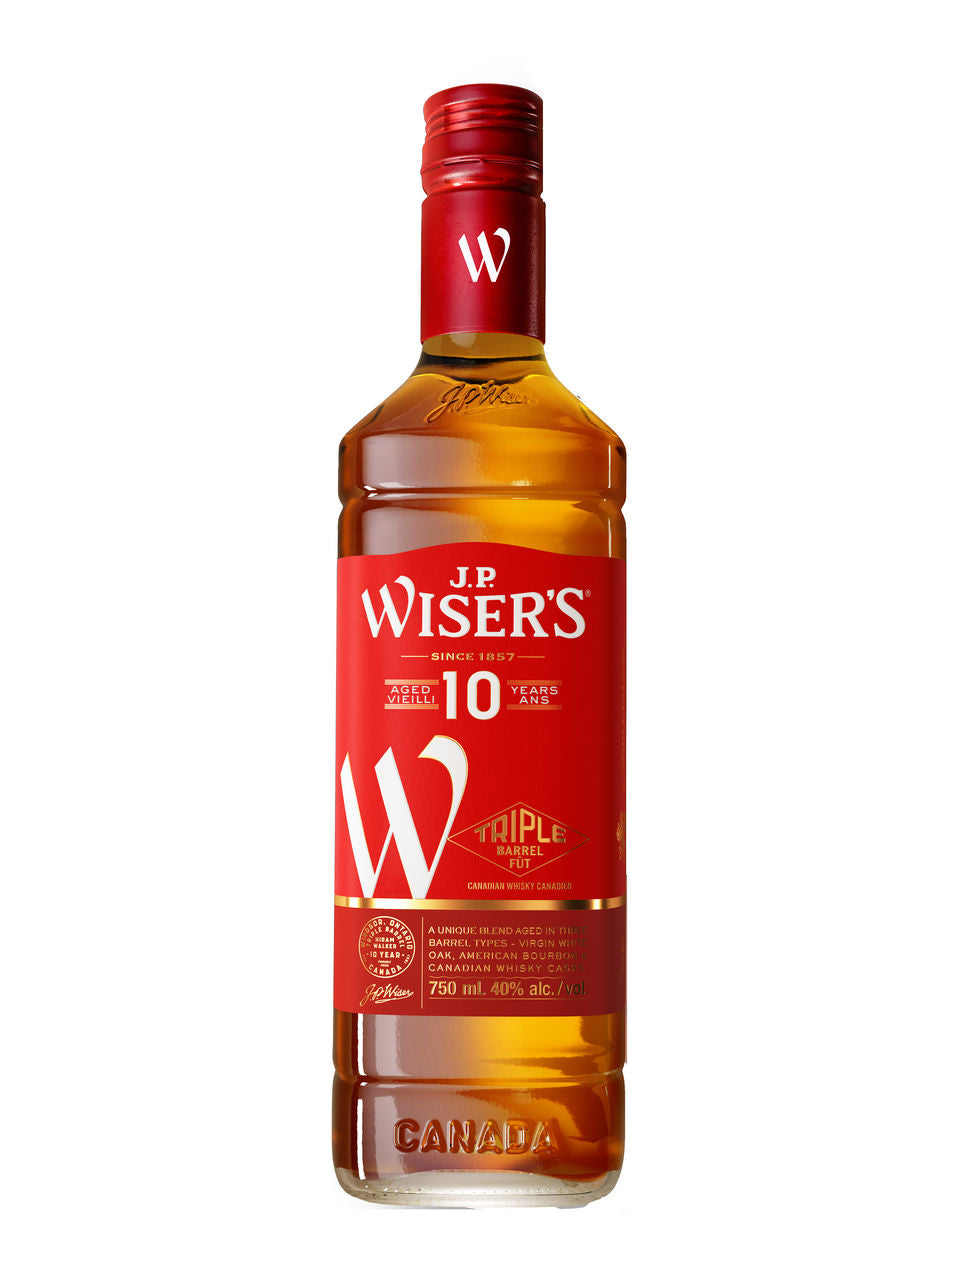 J.P. Wiser's 10 Year Old Canadian Whisky 750 ml bottle